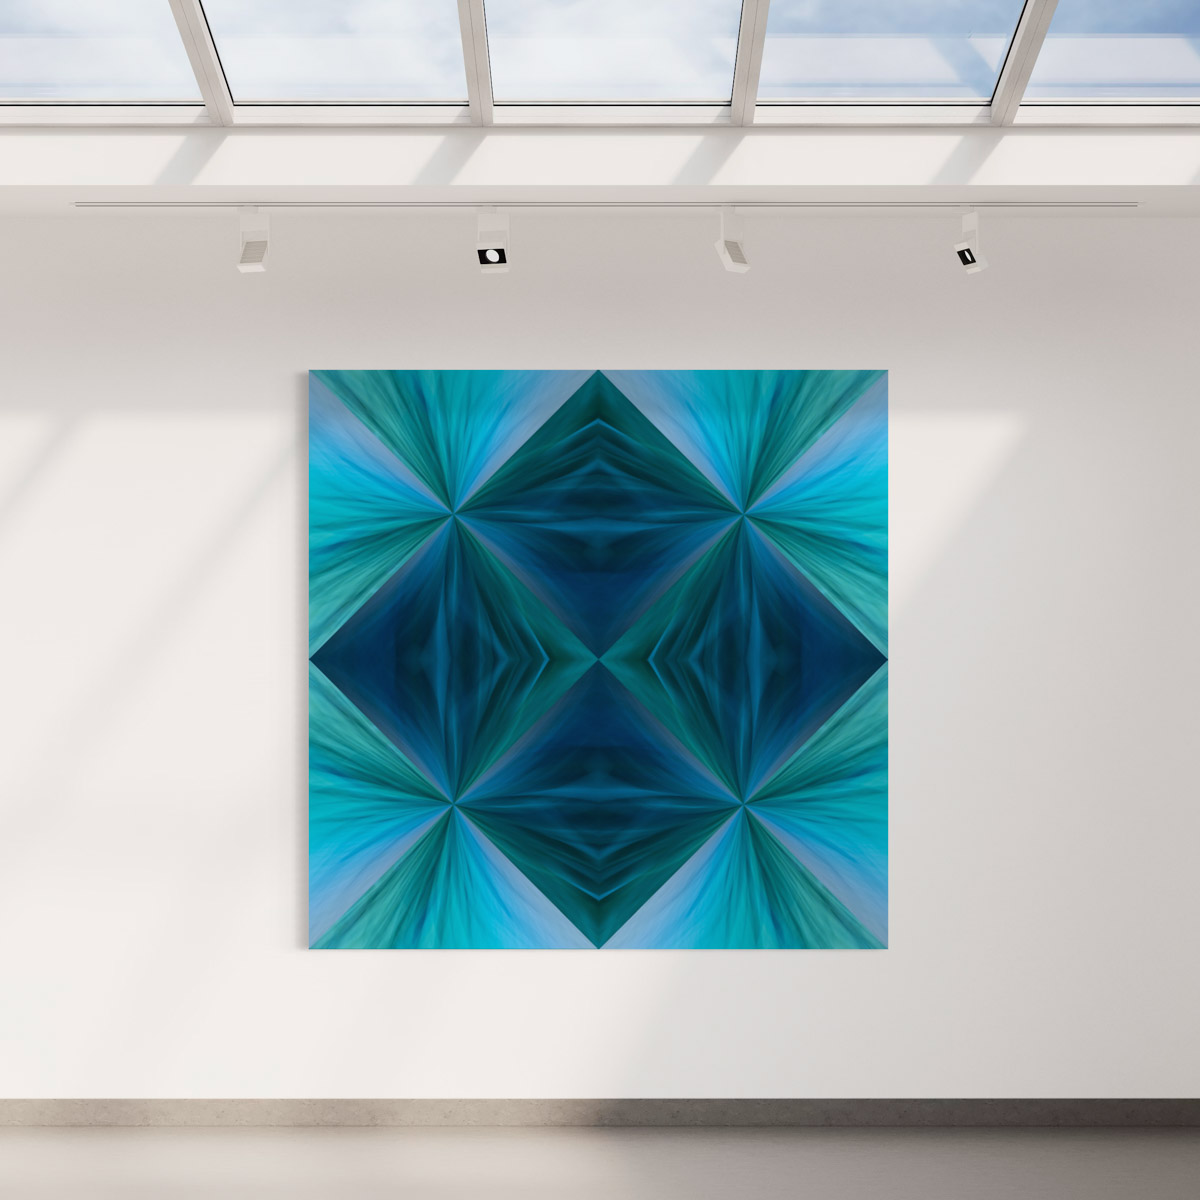 A large blue painting hanging on the wall.